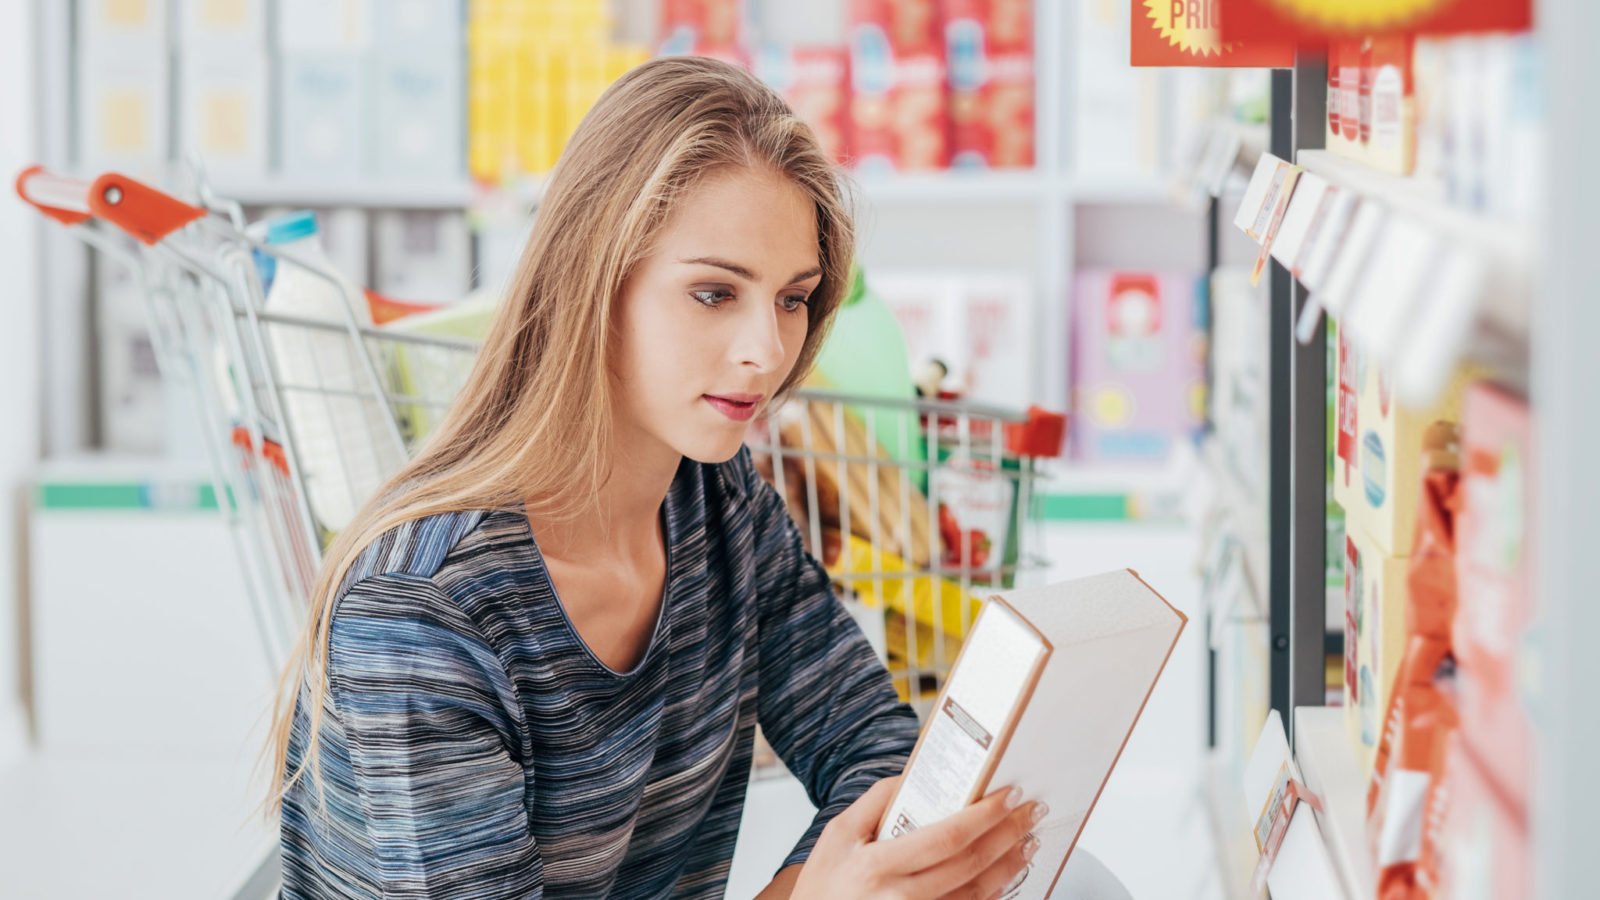 Young woman doing grocery shopping at the supermarket and reading a food label with ingredients on a box, using Nutrigenomics to inform health choices